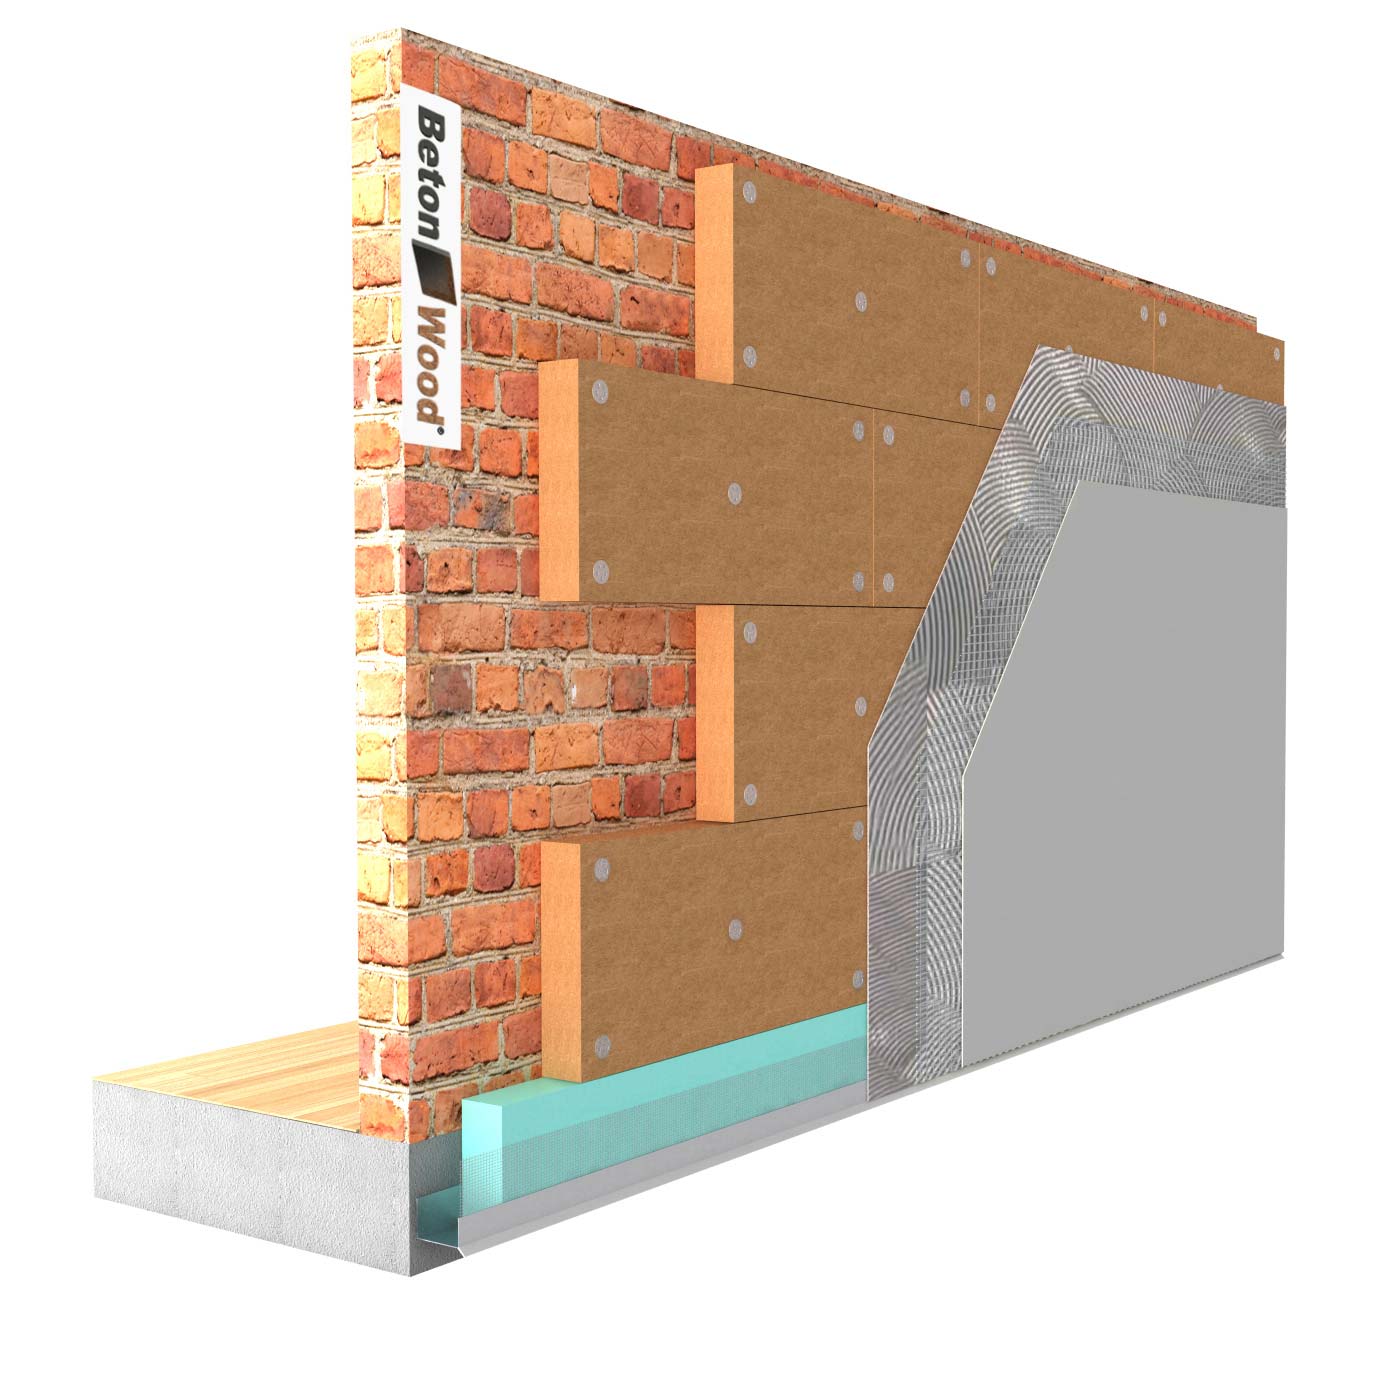 External thermal insulation system in Protect dry Wood fiber